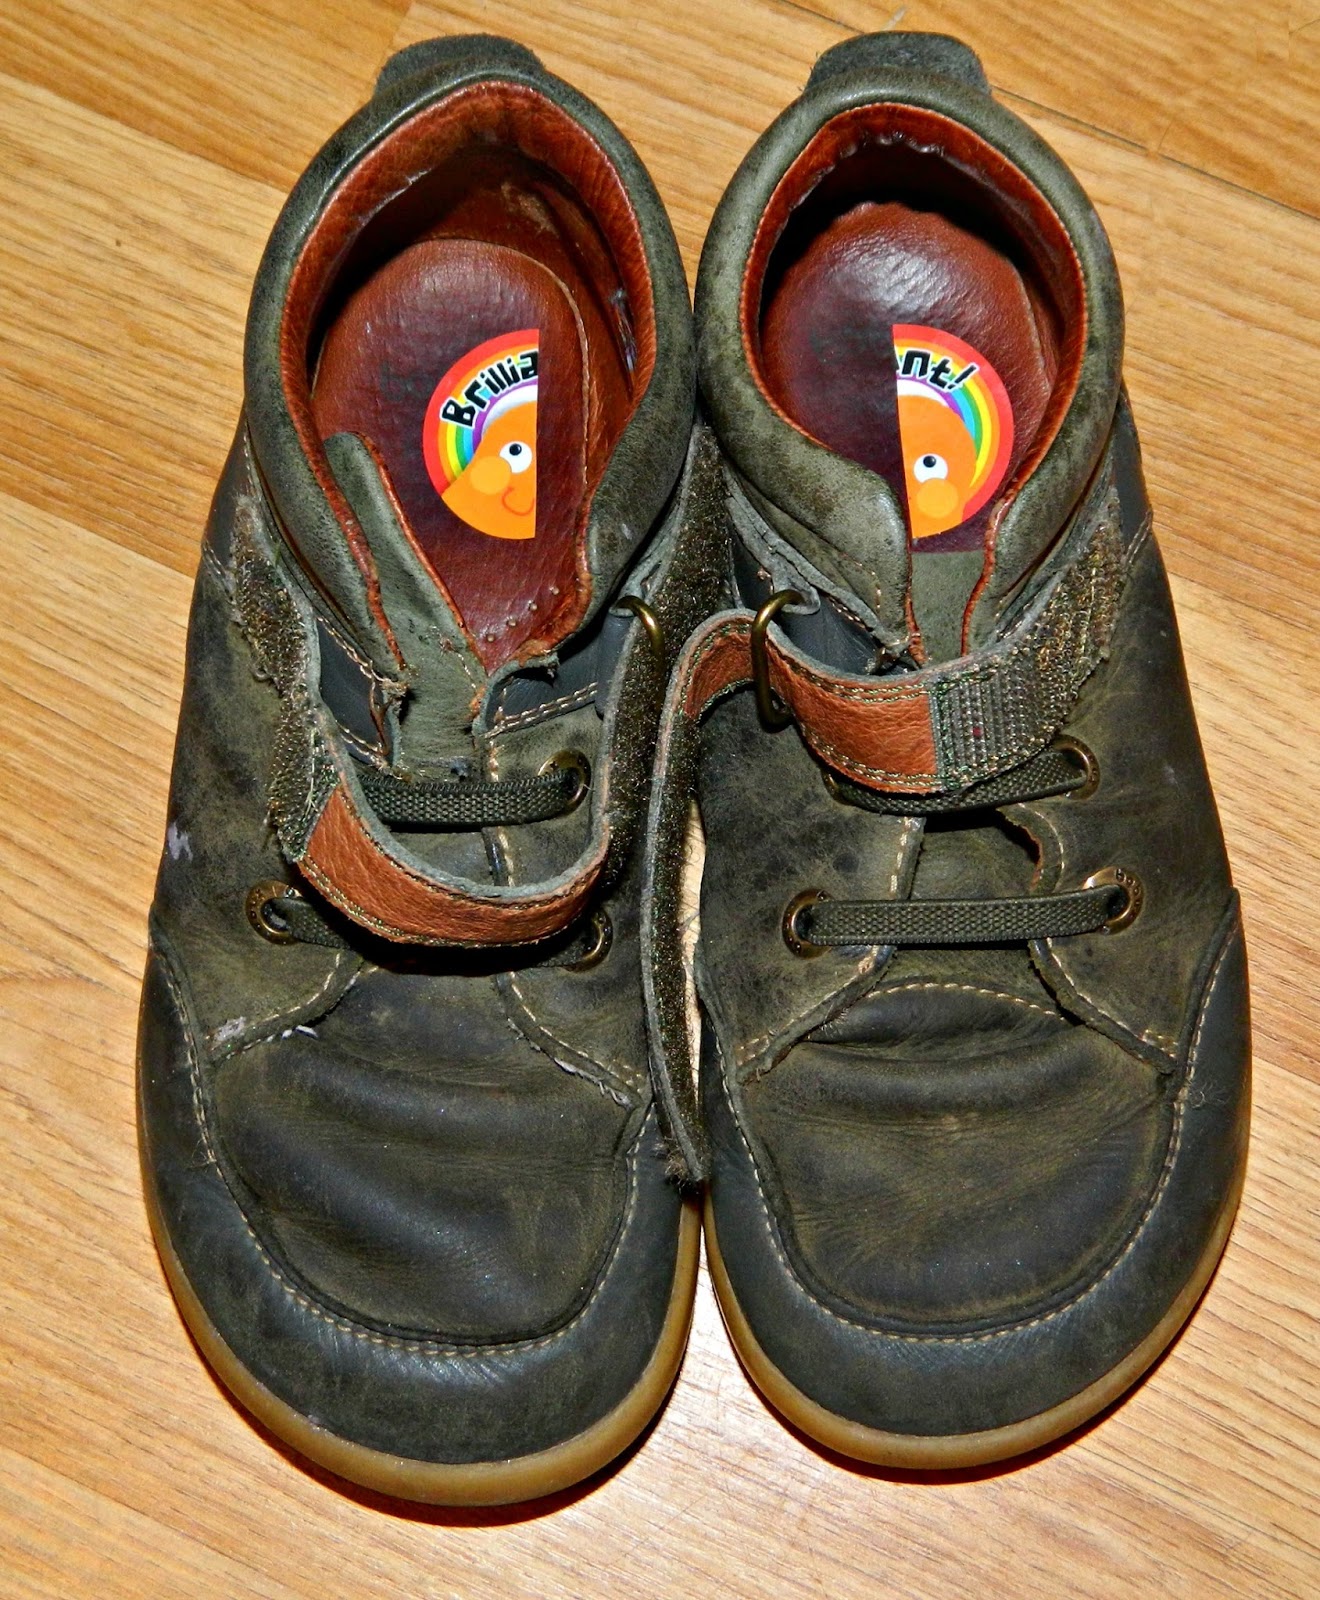 Half a sticker in each shoe to help learn left from right